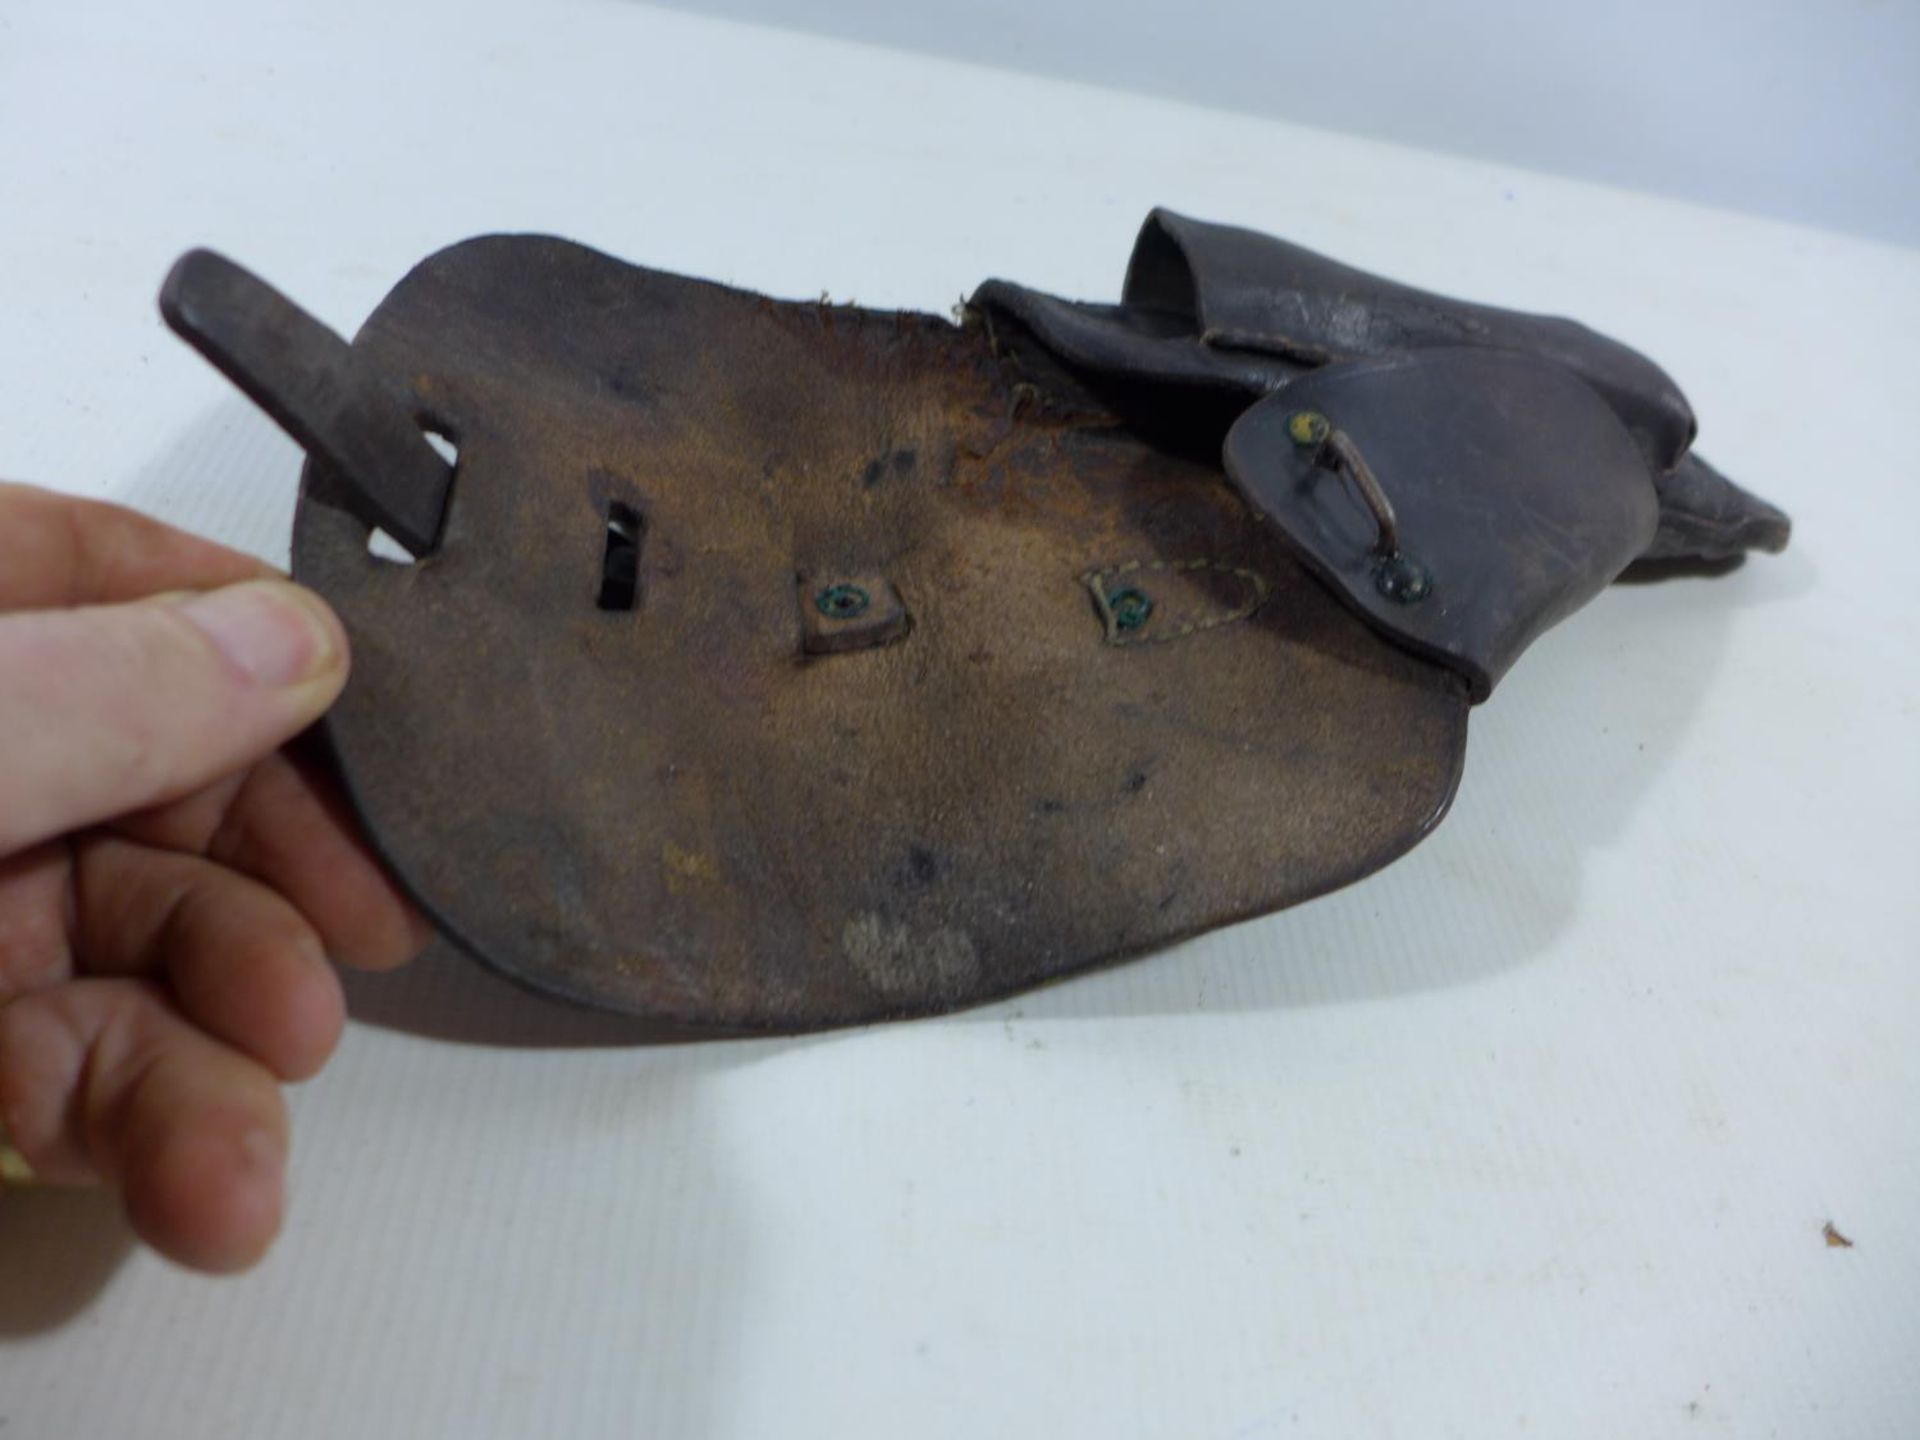 A WORLD WAR II PERIOD LEATHER AUTOMATIC PISTOL HOLSTER - Image 3 of 3